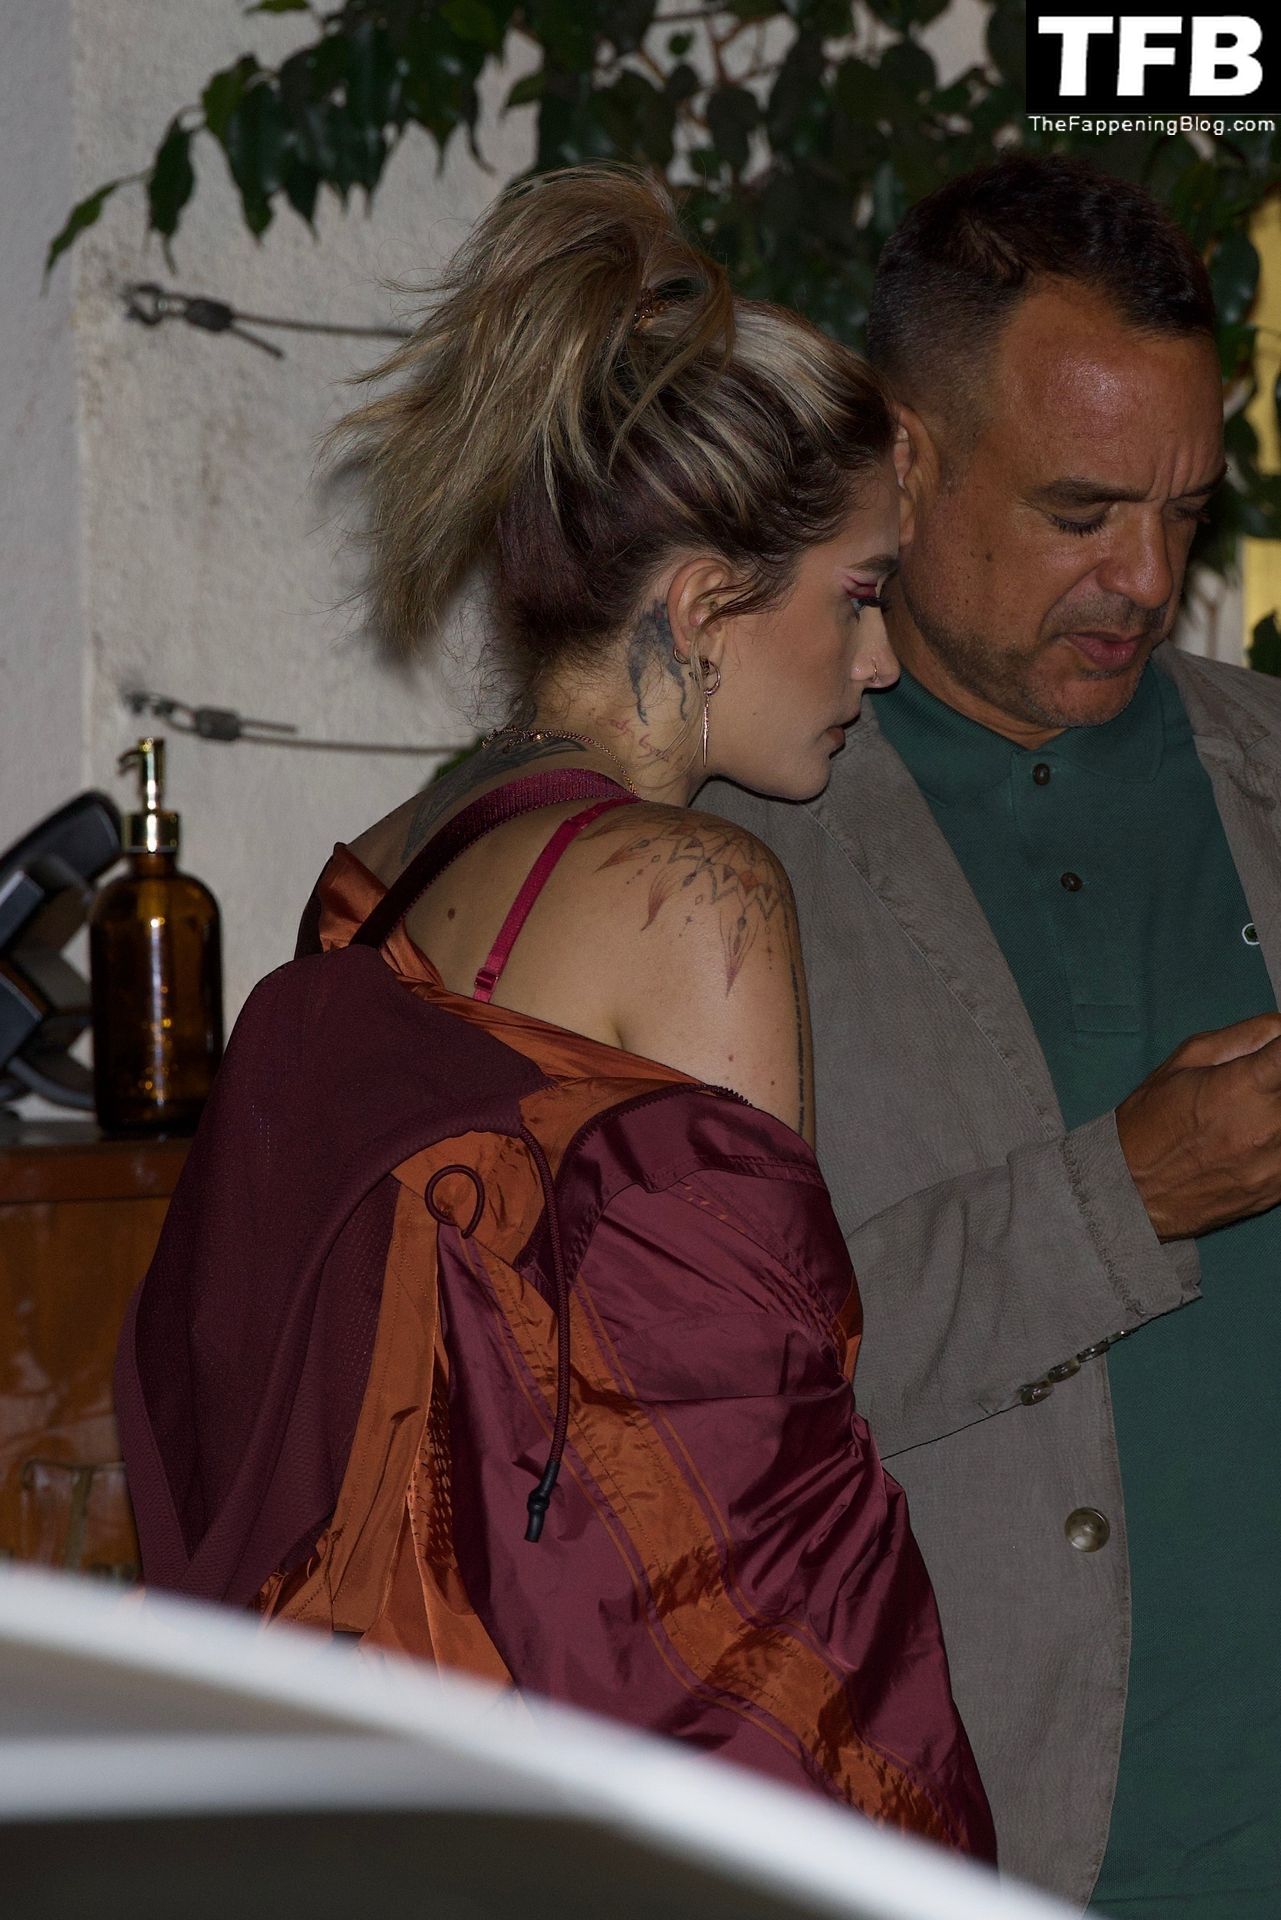 Paris Jackson See Through Nudity The Fappening Blog 33 - Paris Jackson Flashes Her Nude Tits Wearing a See-Through Bra in WeHo (34 Photos)